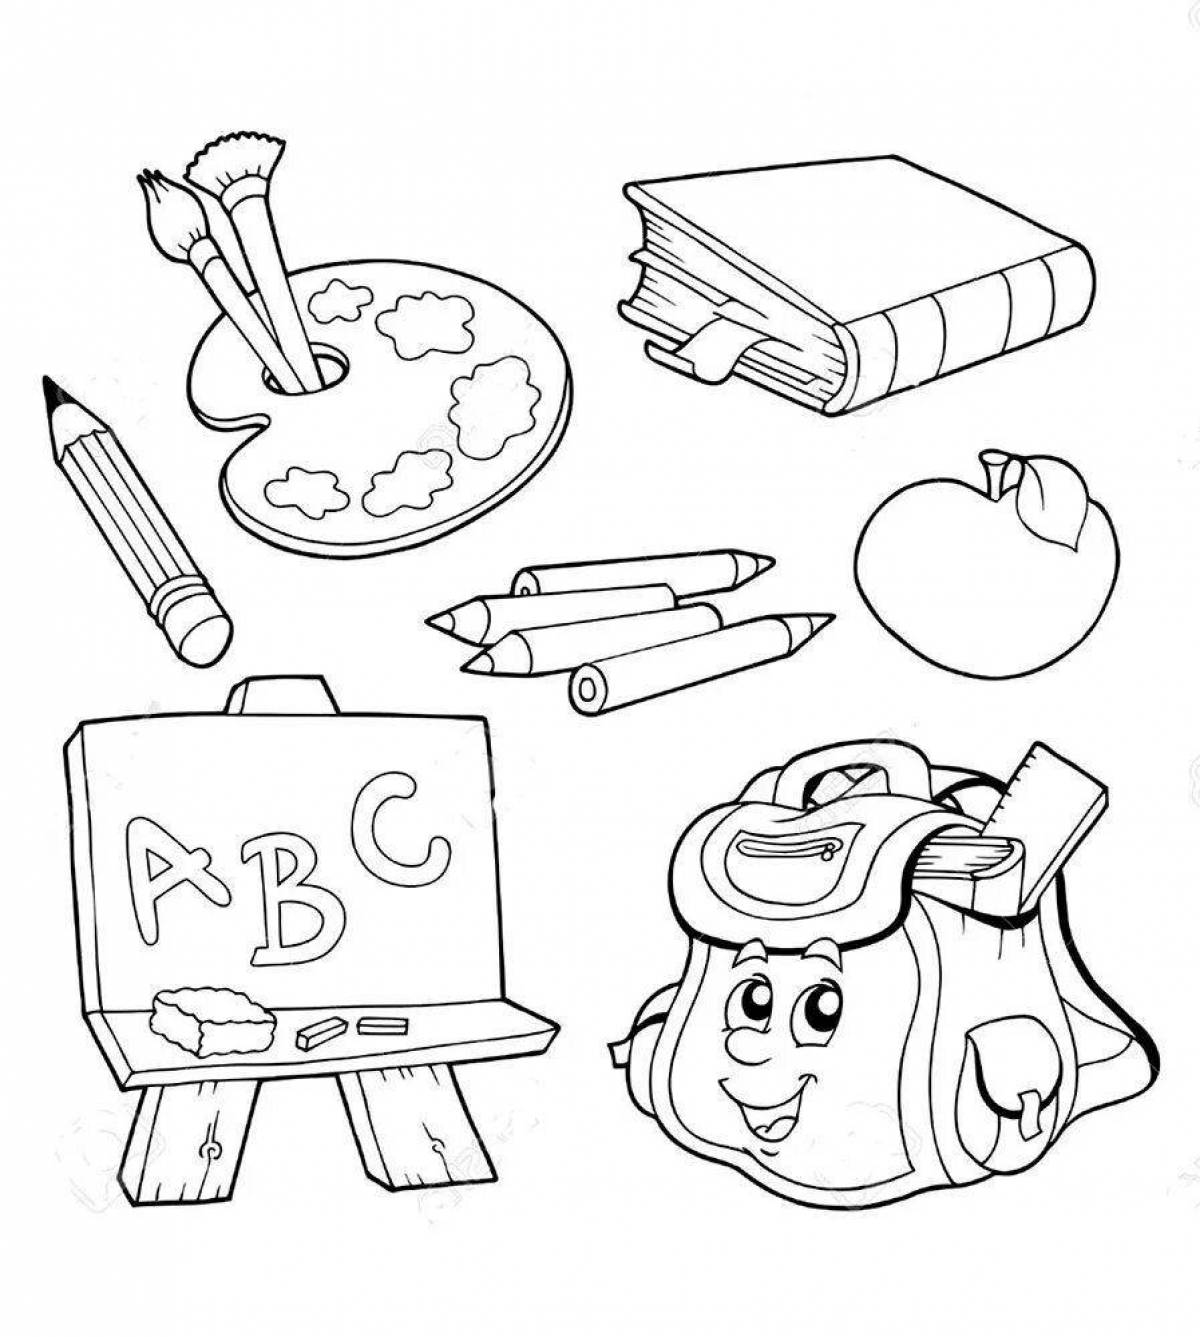 Fun coloring page of school items for kids